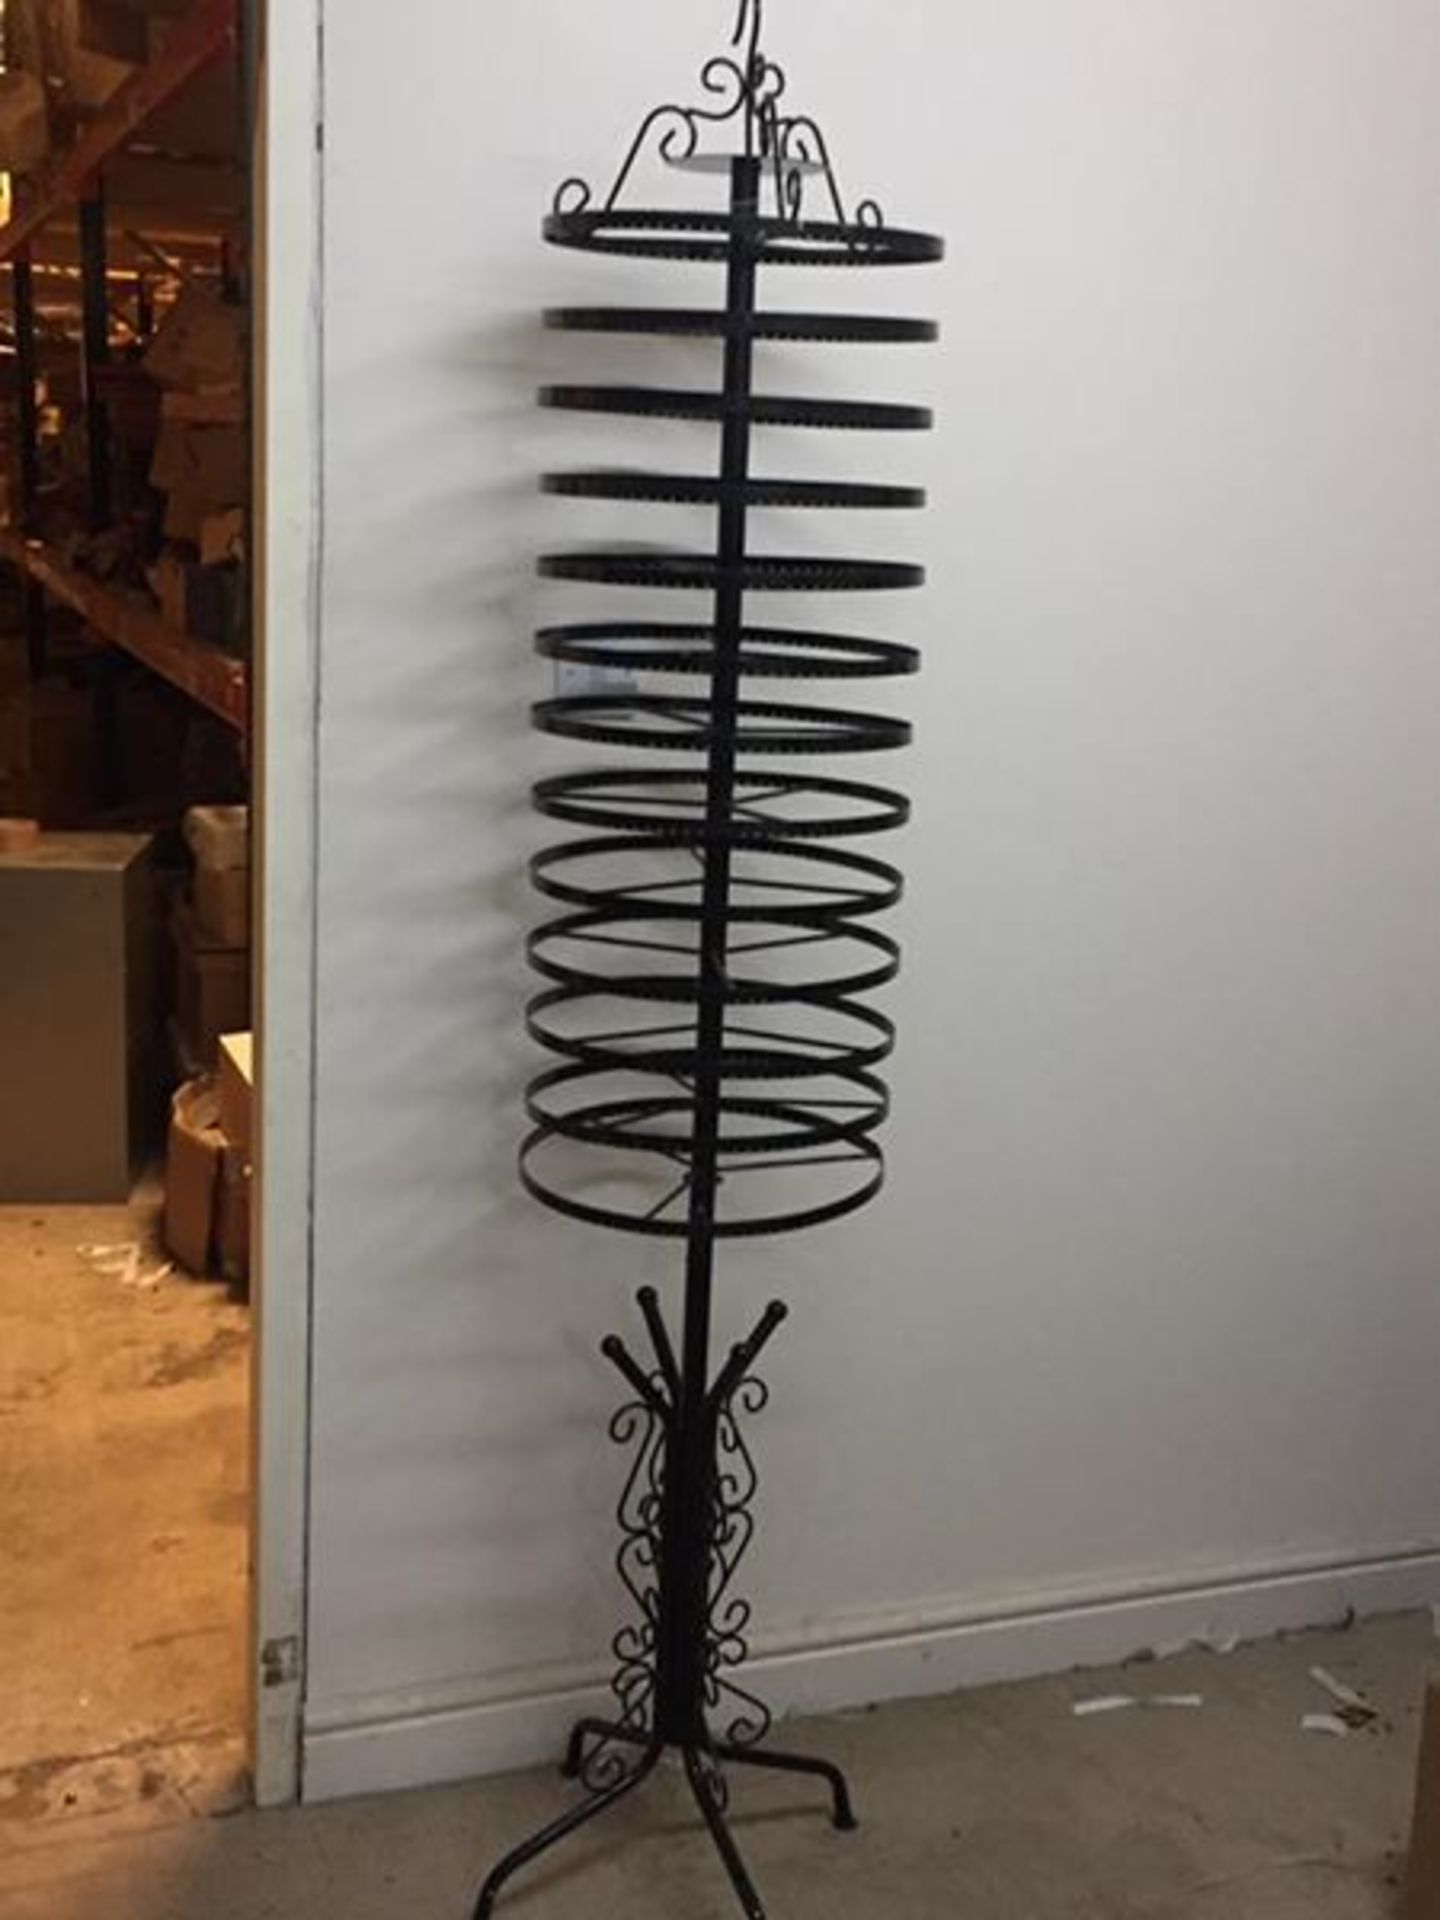 3 Large Shop Jewellery Display Stands. Rotating 13 tier.190cm Tall. All sizes and quantities are